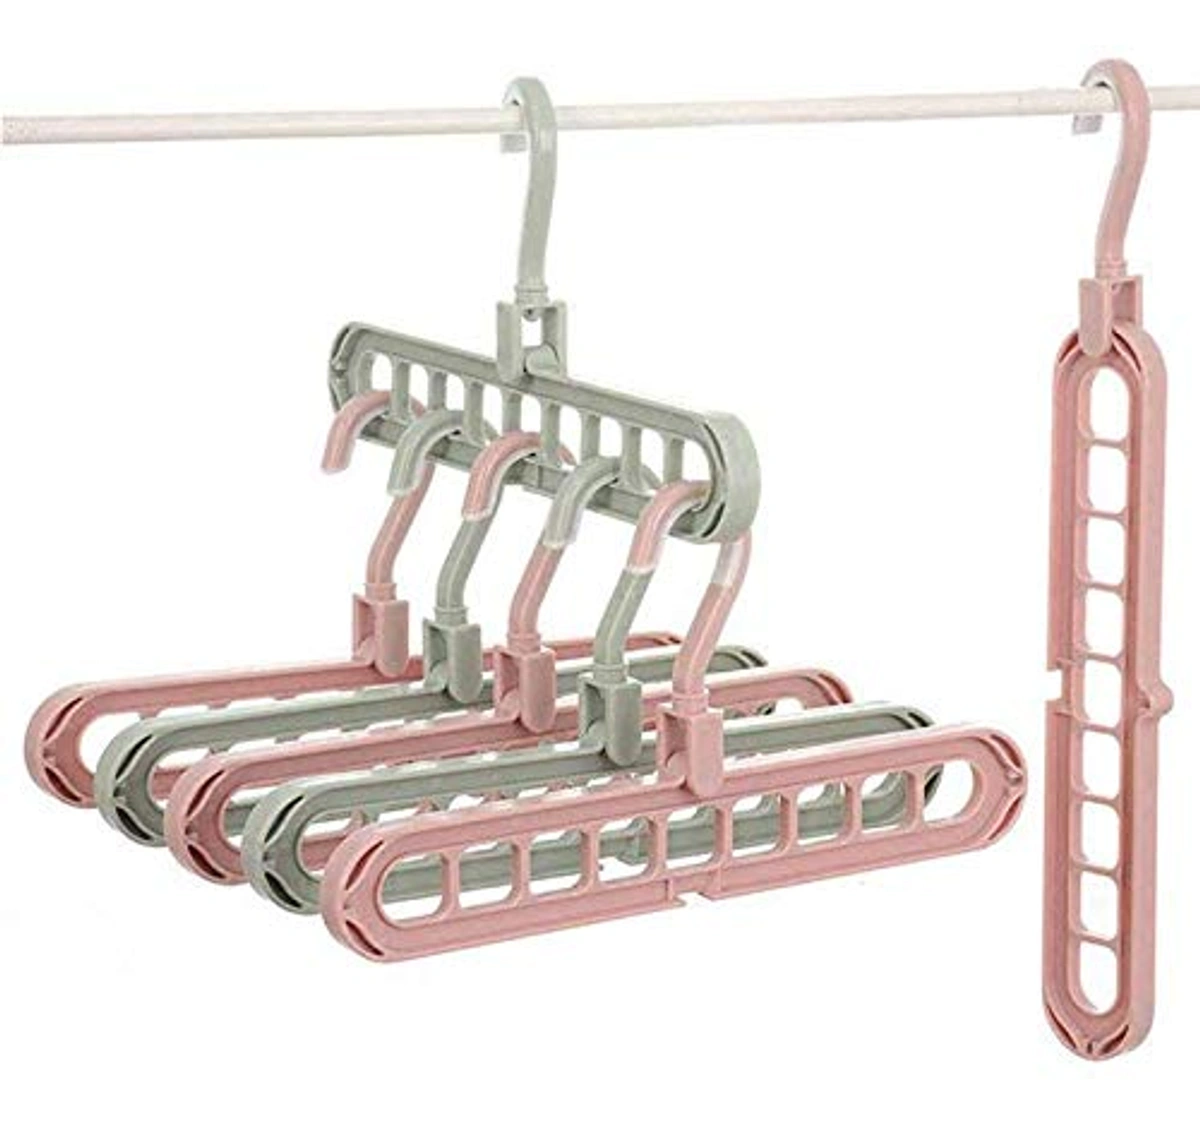 9 Holes Magic Clothes Hangers Metal Space Saving Hangers Sturdy